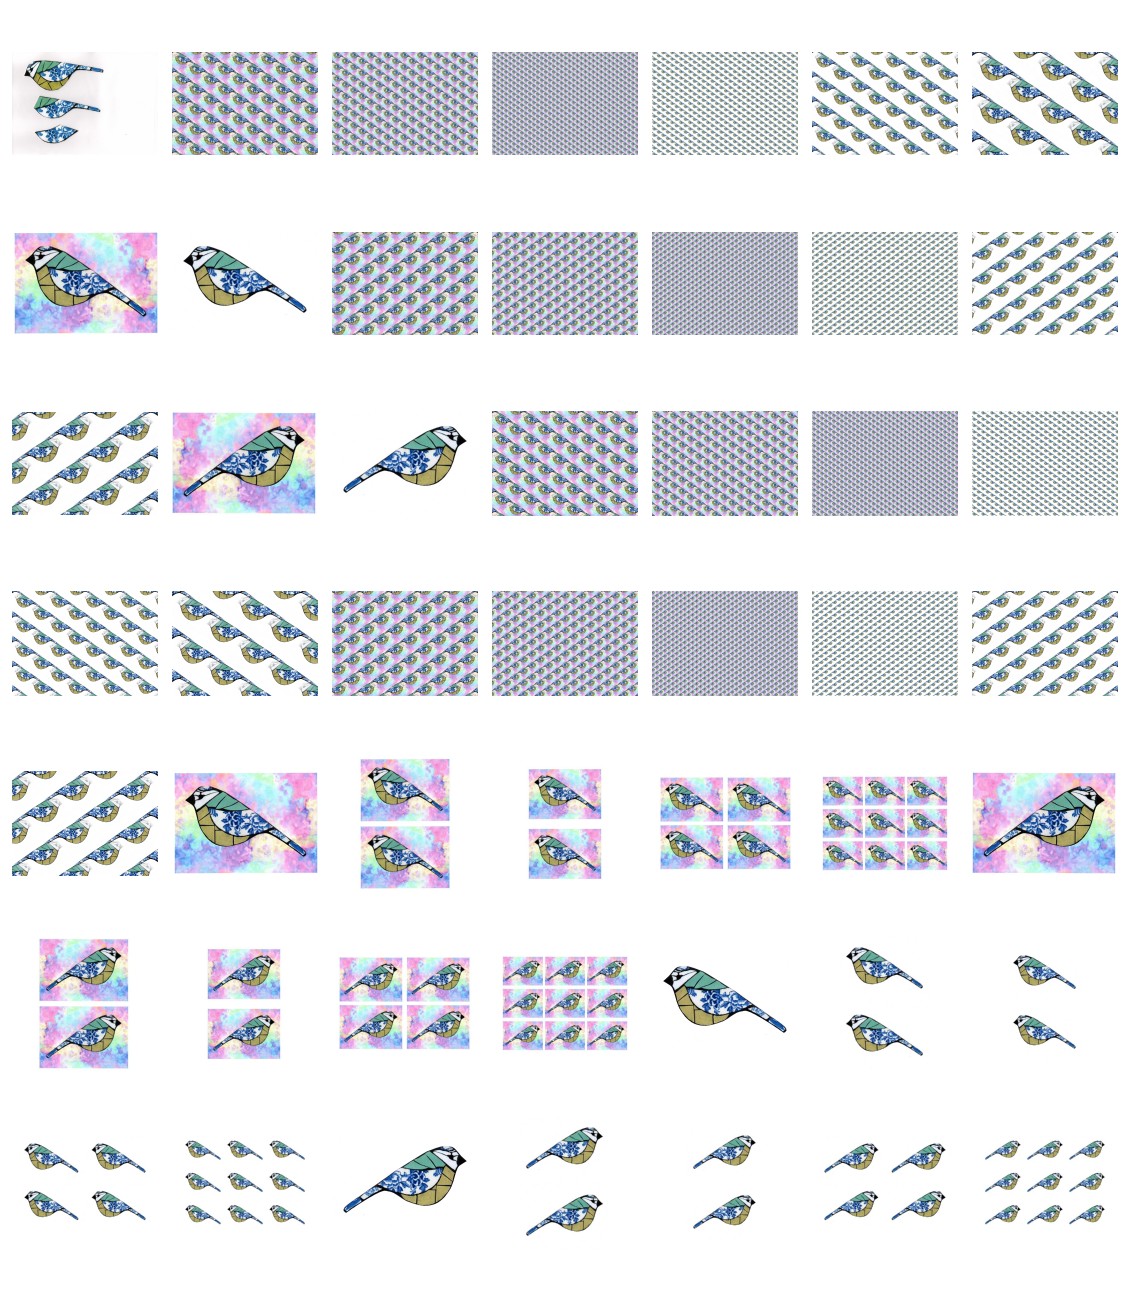 Tiled Effect Birds - Set 07 - 48 Pages to Download